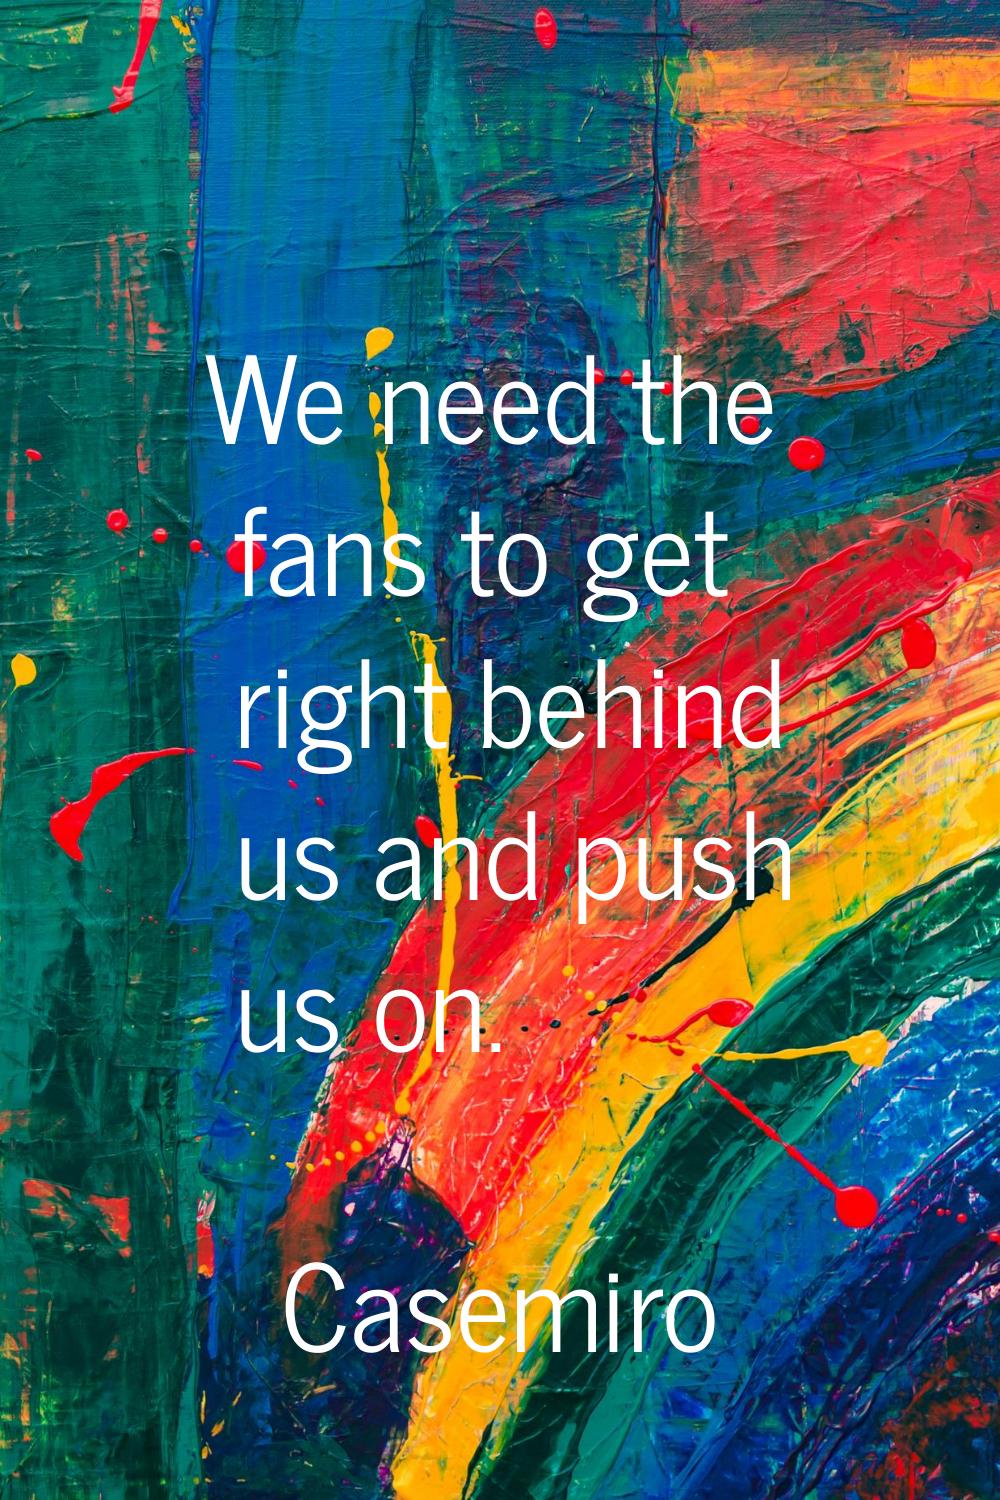 We need the fans to get right behind us and push us on.